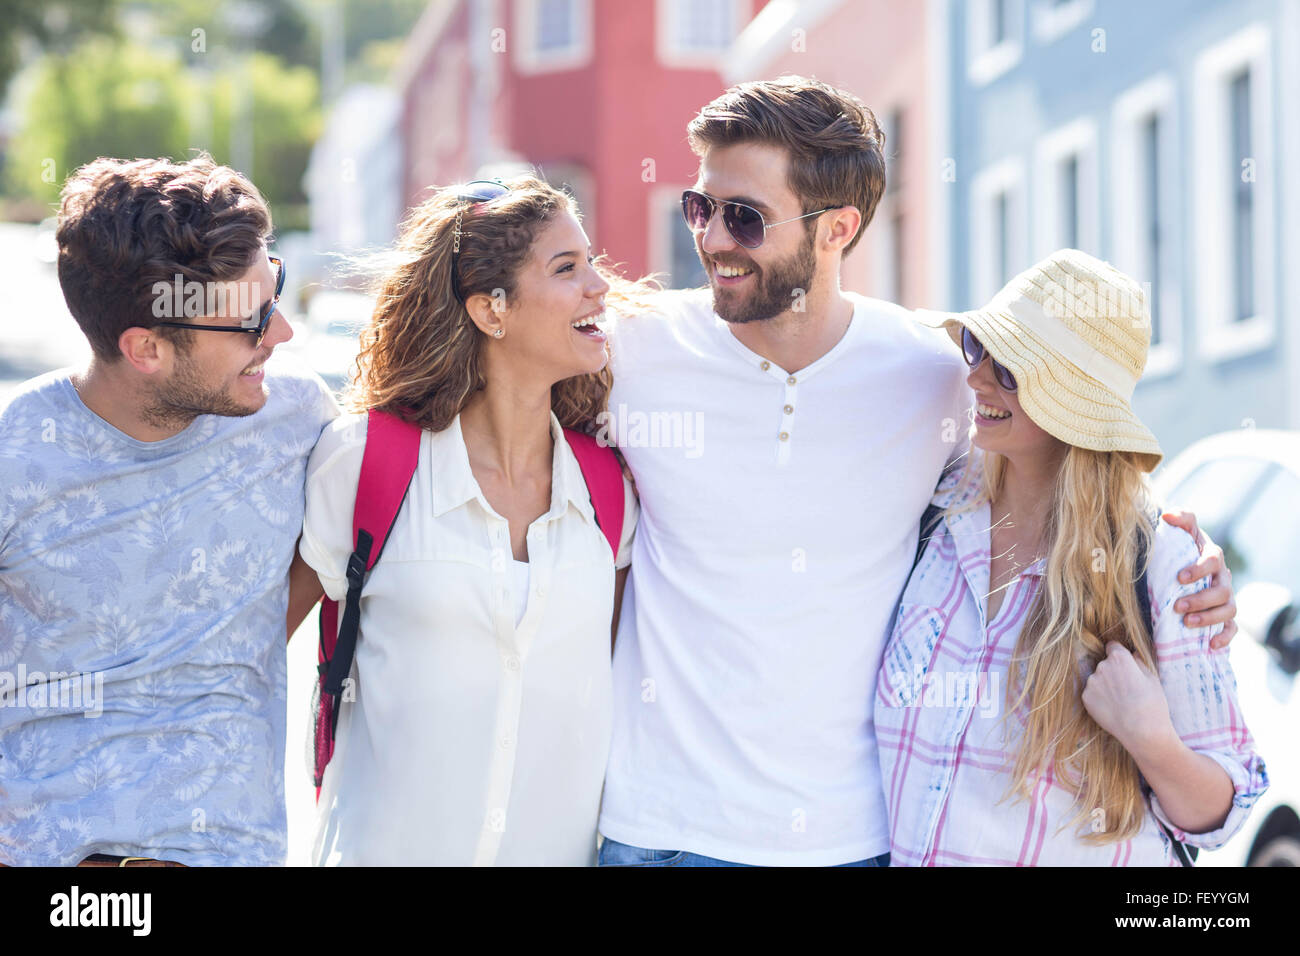 Hip friends spending time together Stock Photo